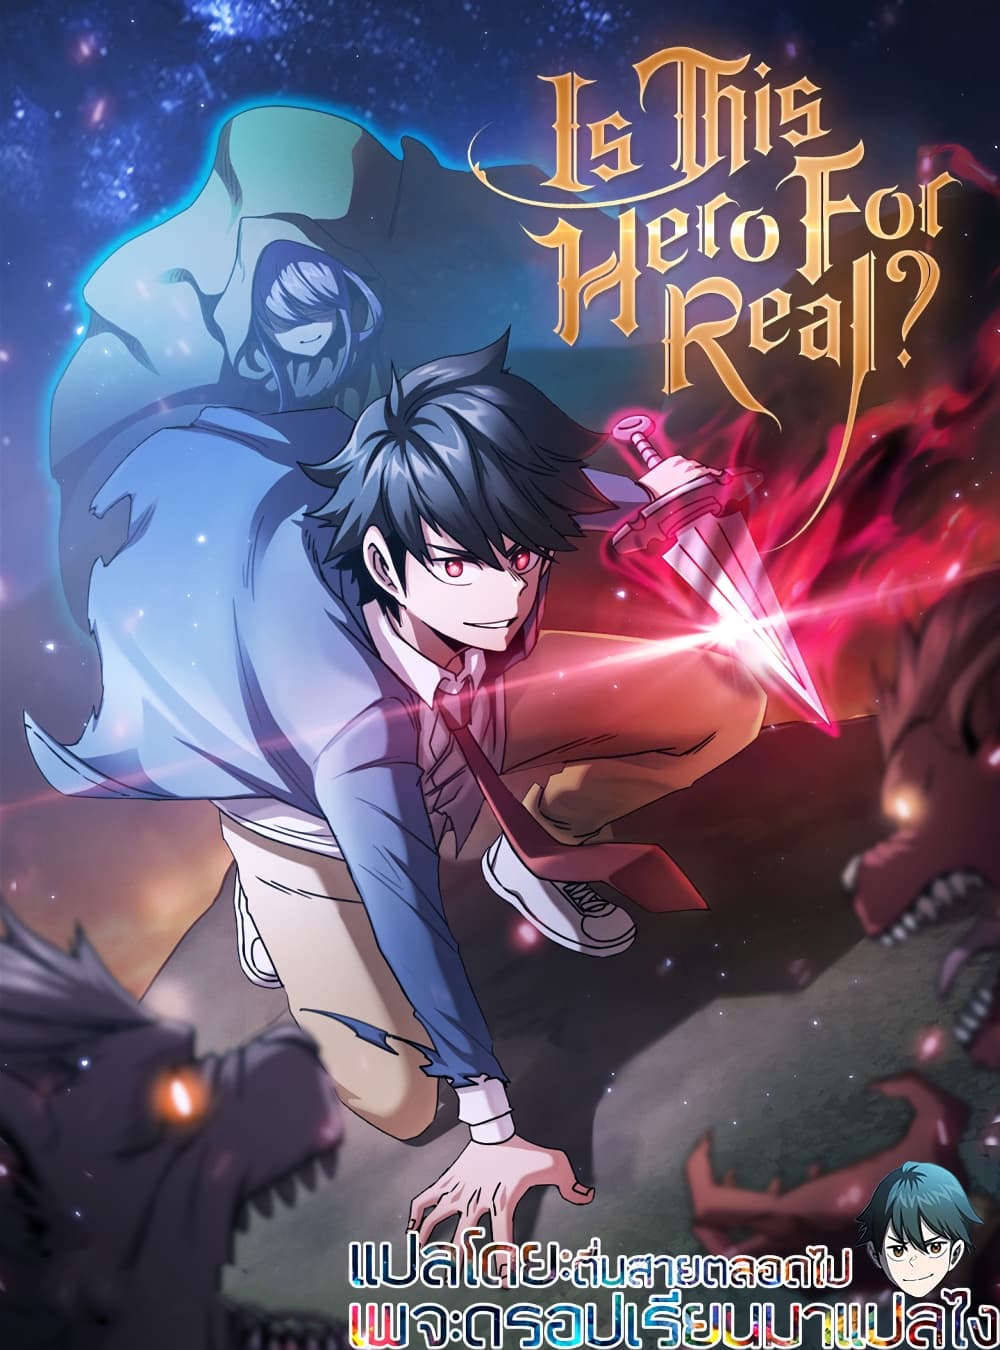 Is This Hero for Real à¸à¸­à¸à¸à¸µà¹ 31 (1)